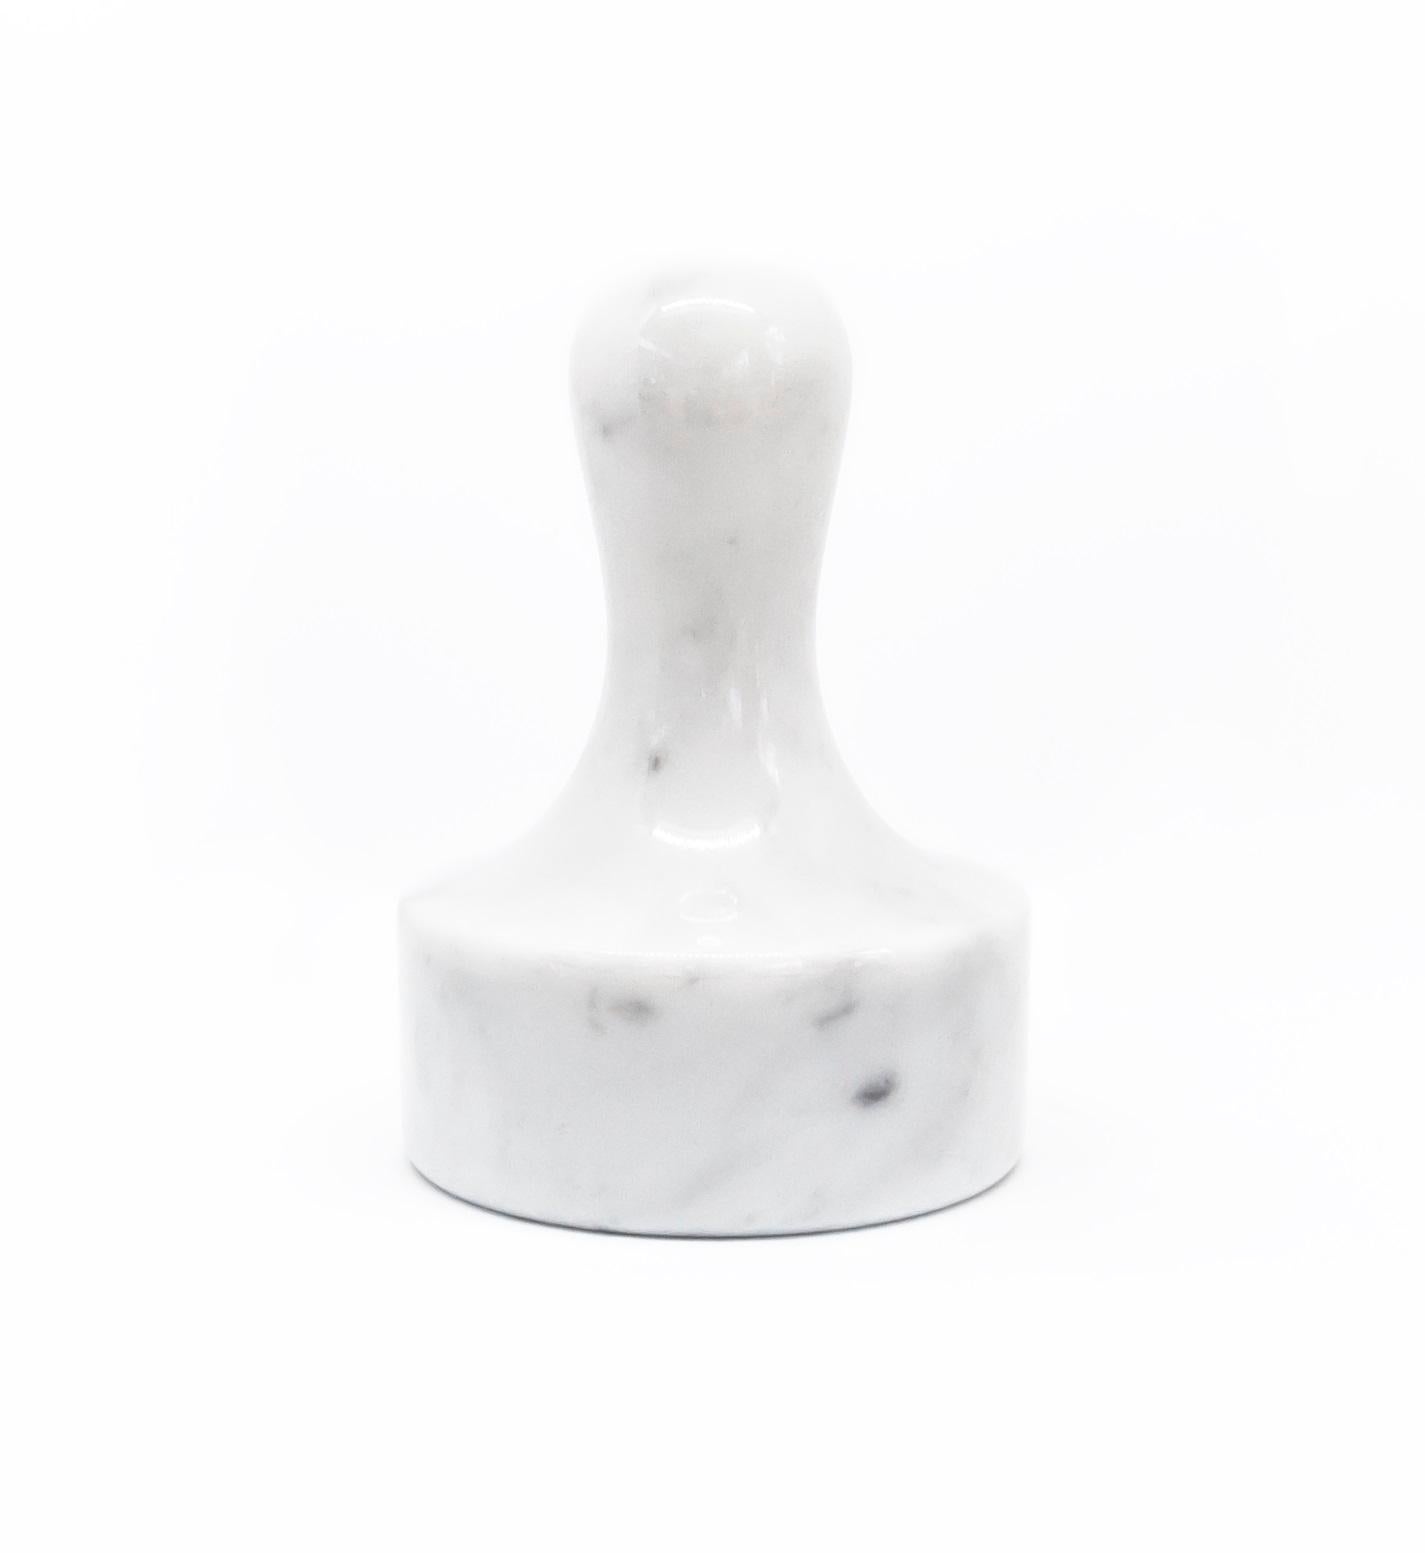 Meat mallet in white Carrara marble.

Each piece is in a way unique (since each marble block is different in veins and shades) and handcrafted in Italy. Slight variations in shape, color and size are to be considered a guarantee of an handcrafted